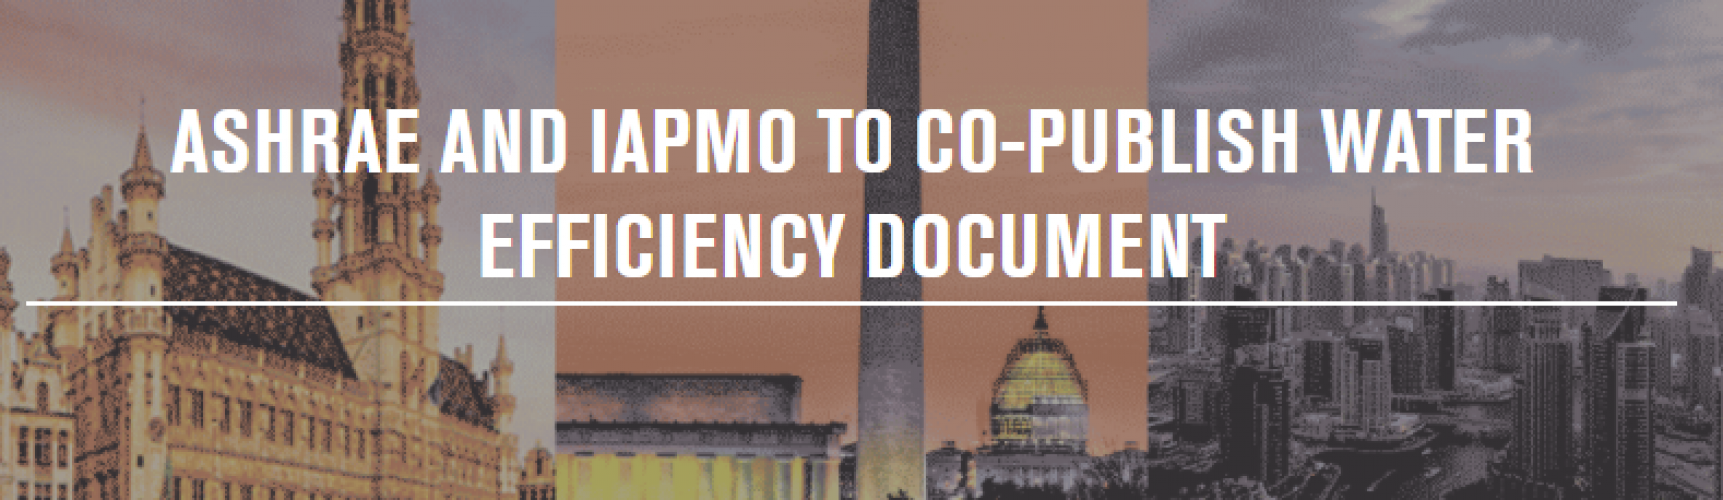 ashrae-and-iapmo-to-co-publish-water-efficiency-document